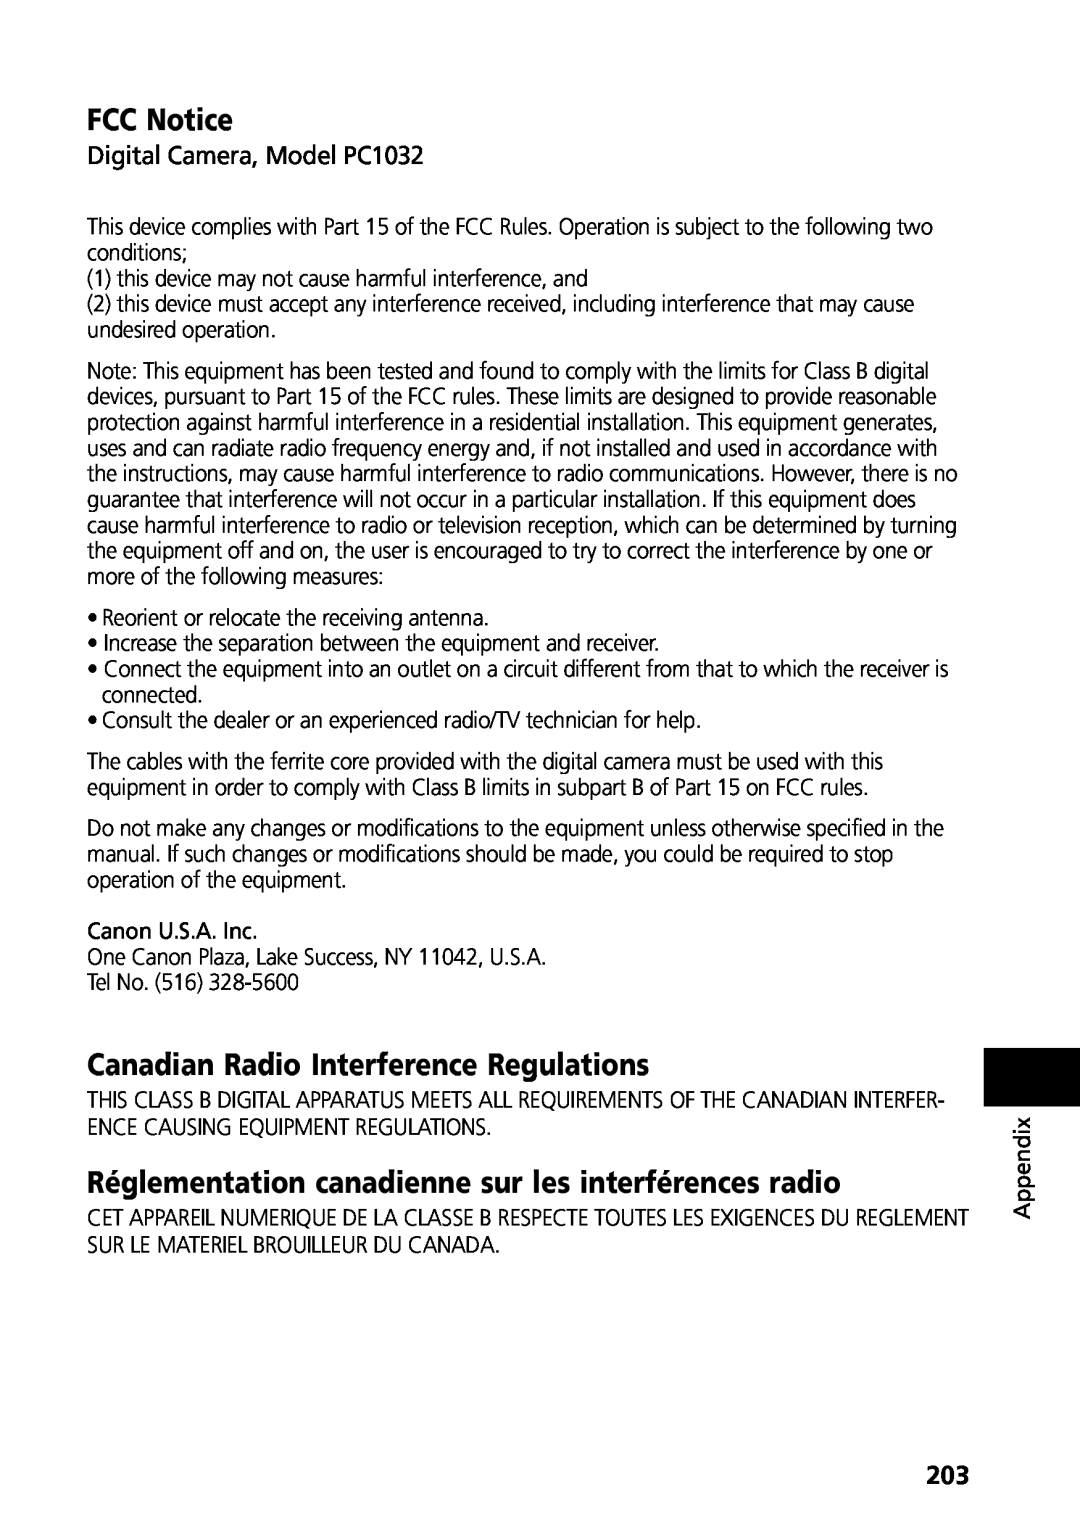 Canon G3 manual FCC Notice, Canadian Radio Interference Regulations, Réglementation canadienne sur les interférences radio 